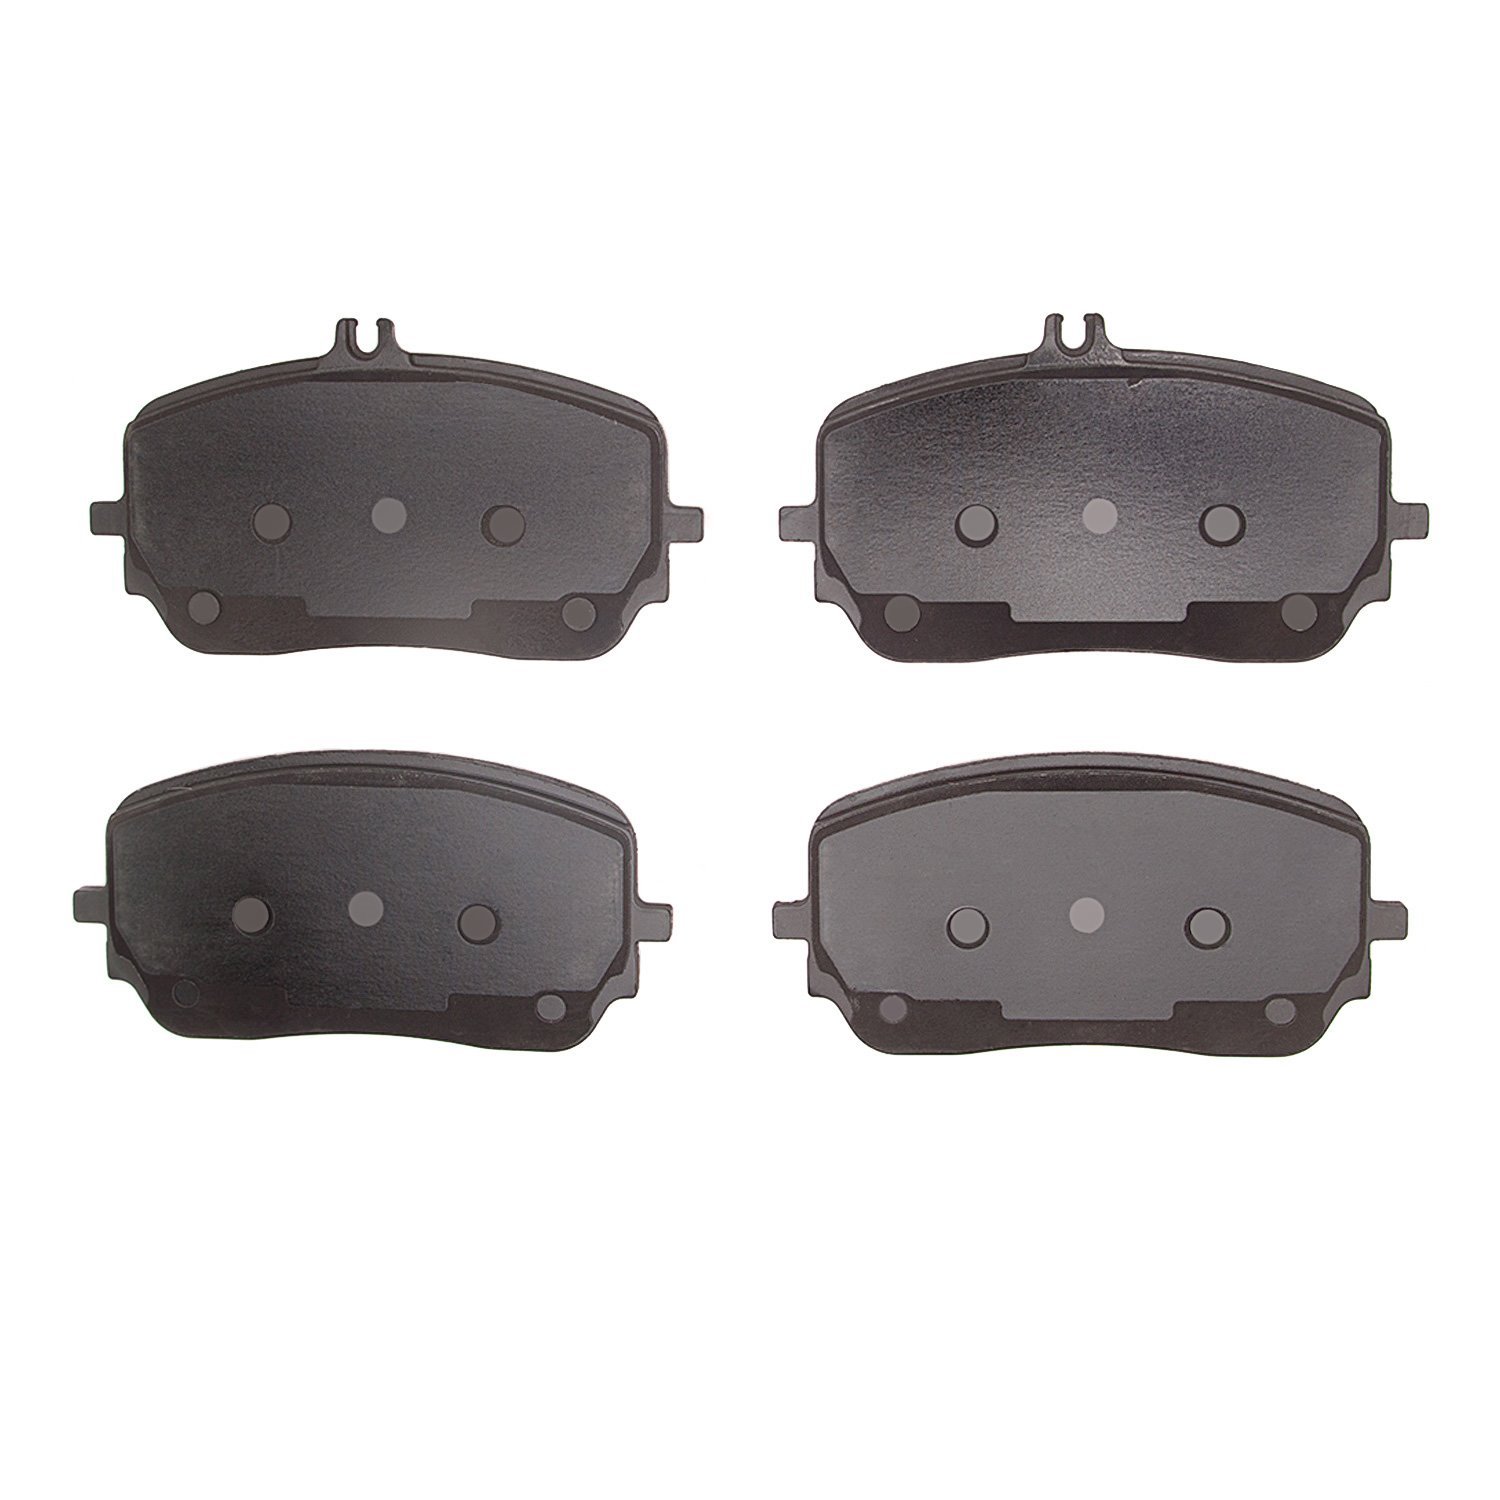 1552-2237-00 5000 Advanced Low-Metallic Brake Pads, Fits Select Mercedes-Benz, Position: Front